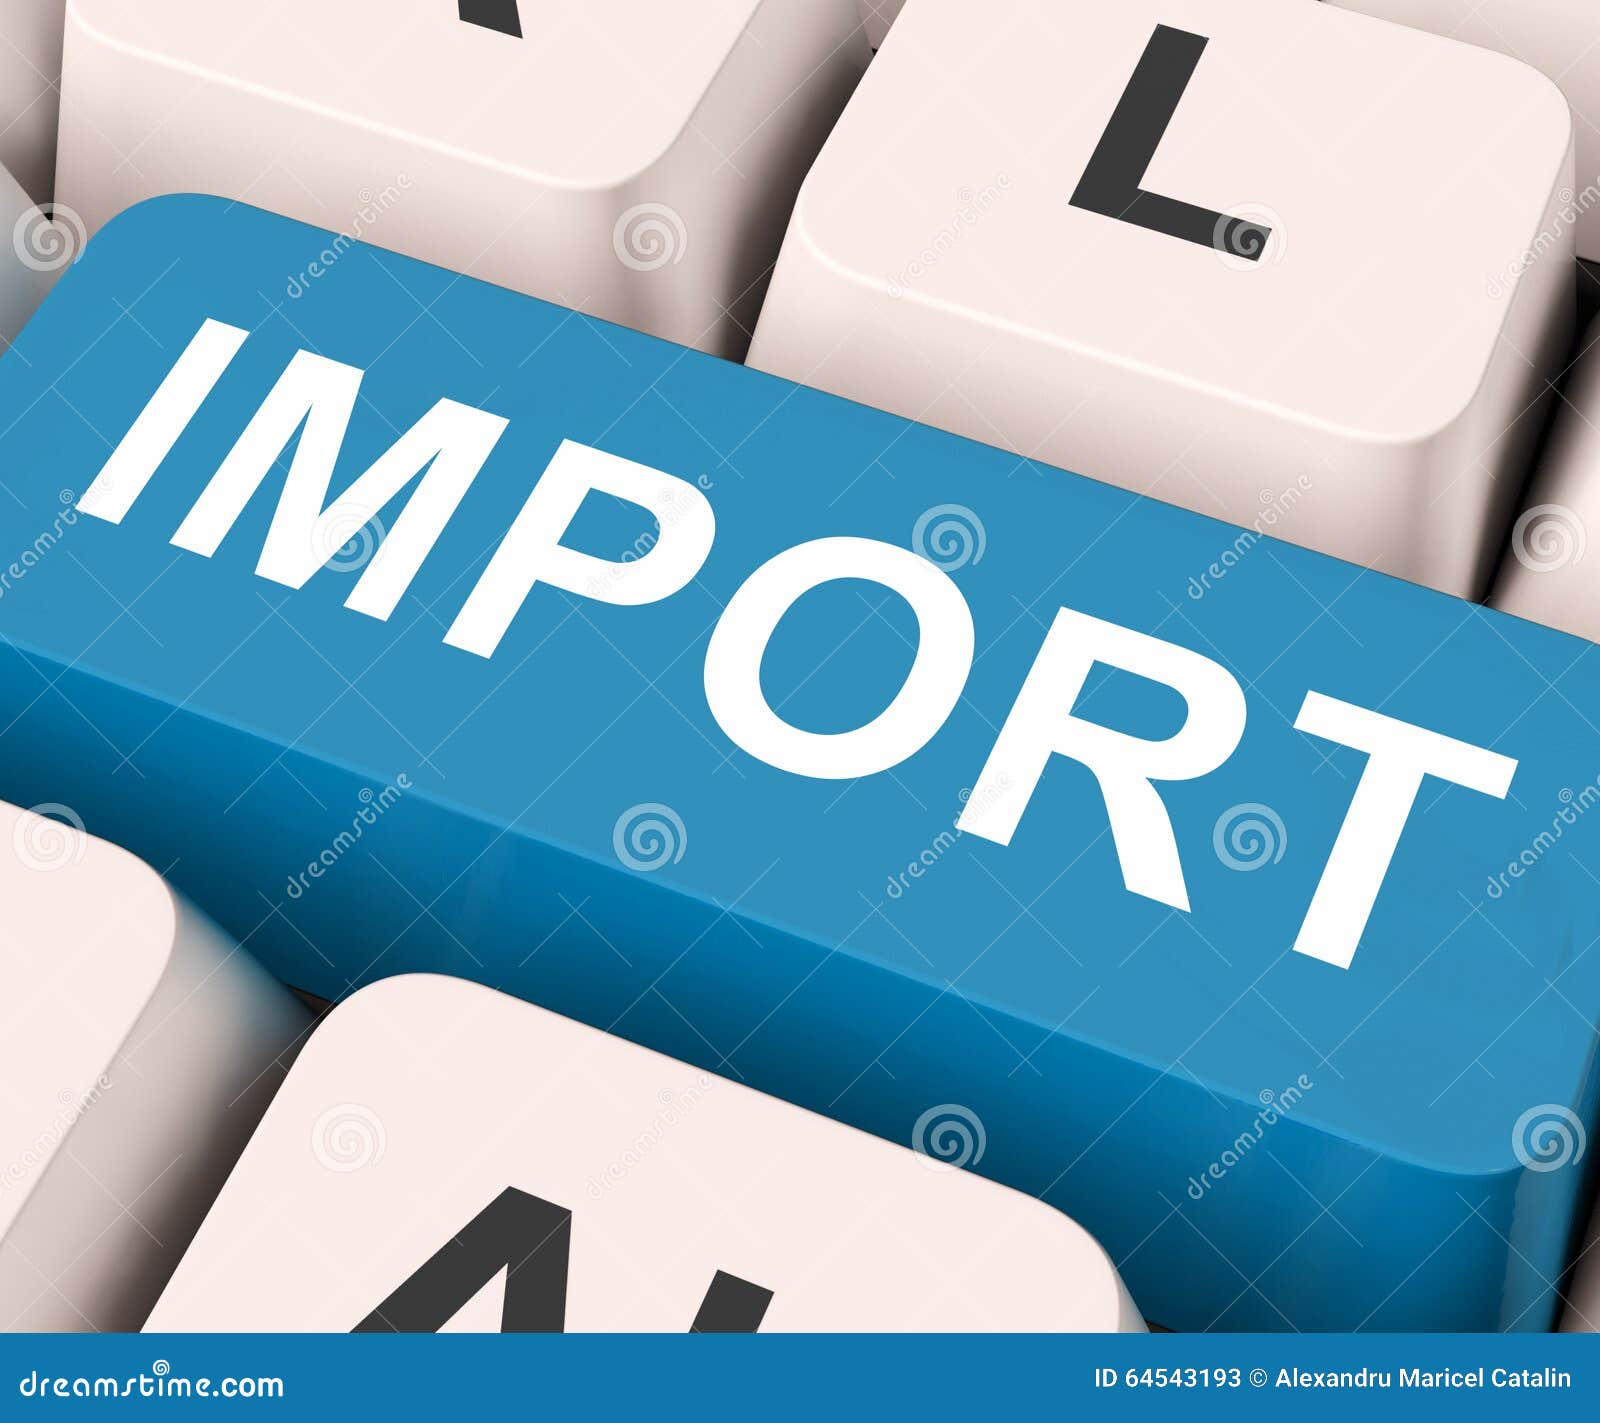 import key means importing or imports